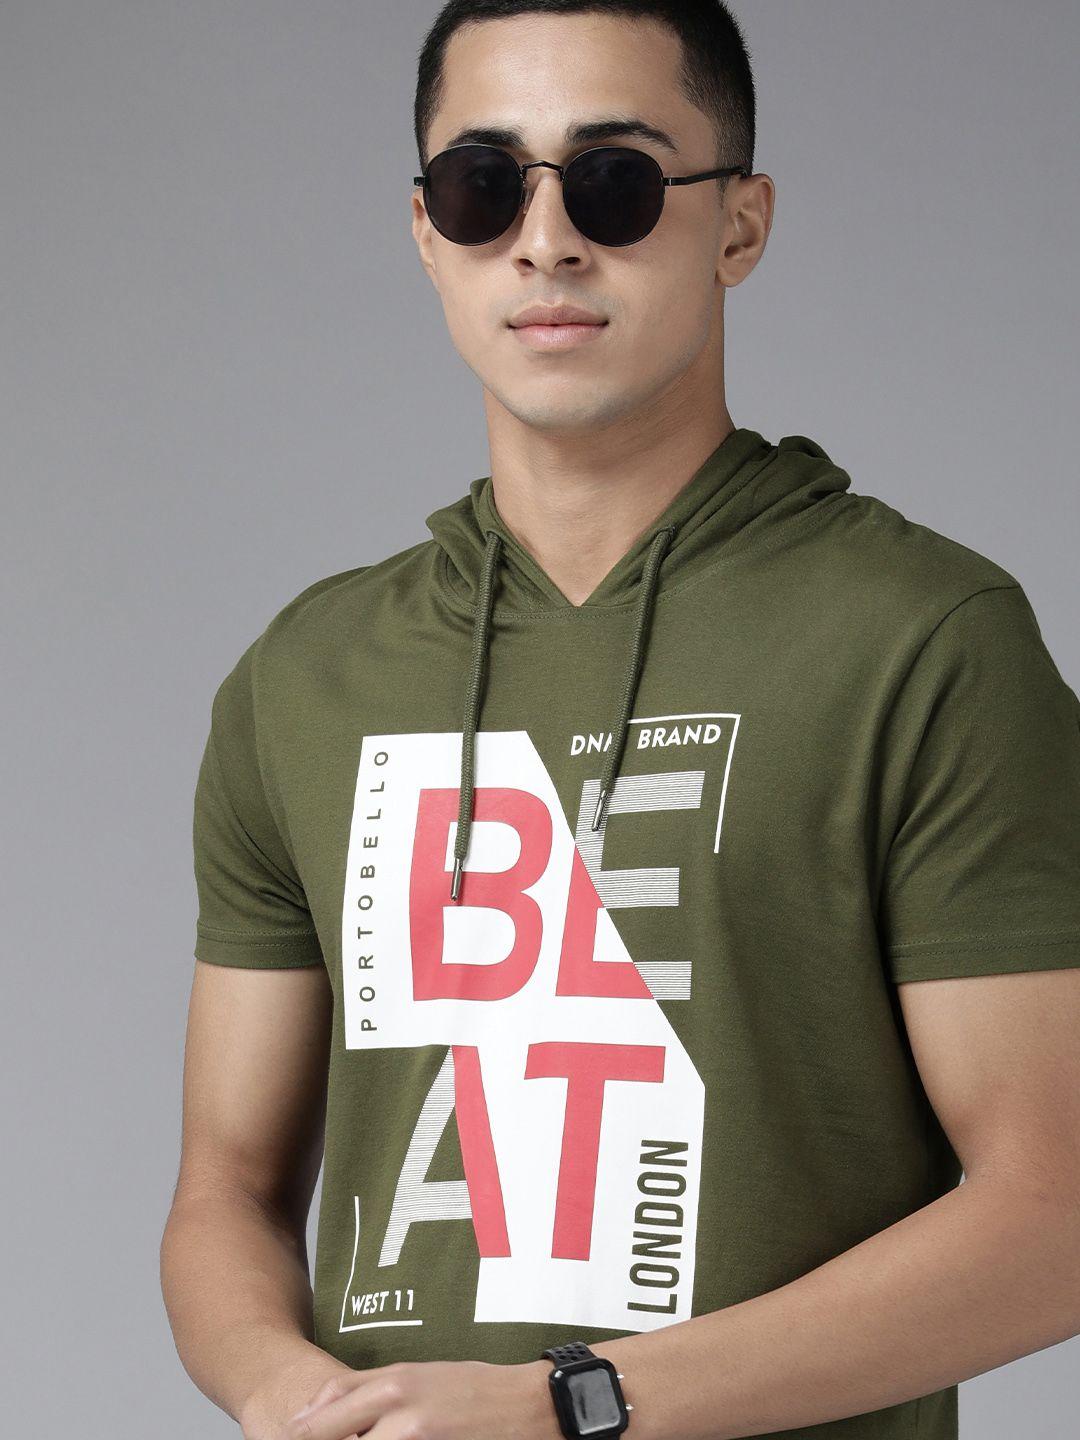 beat london by pepe jeans men olive green & white typography printed t-shirt